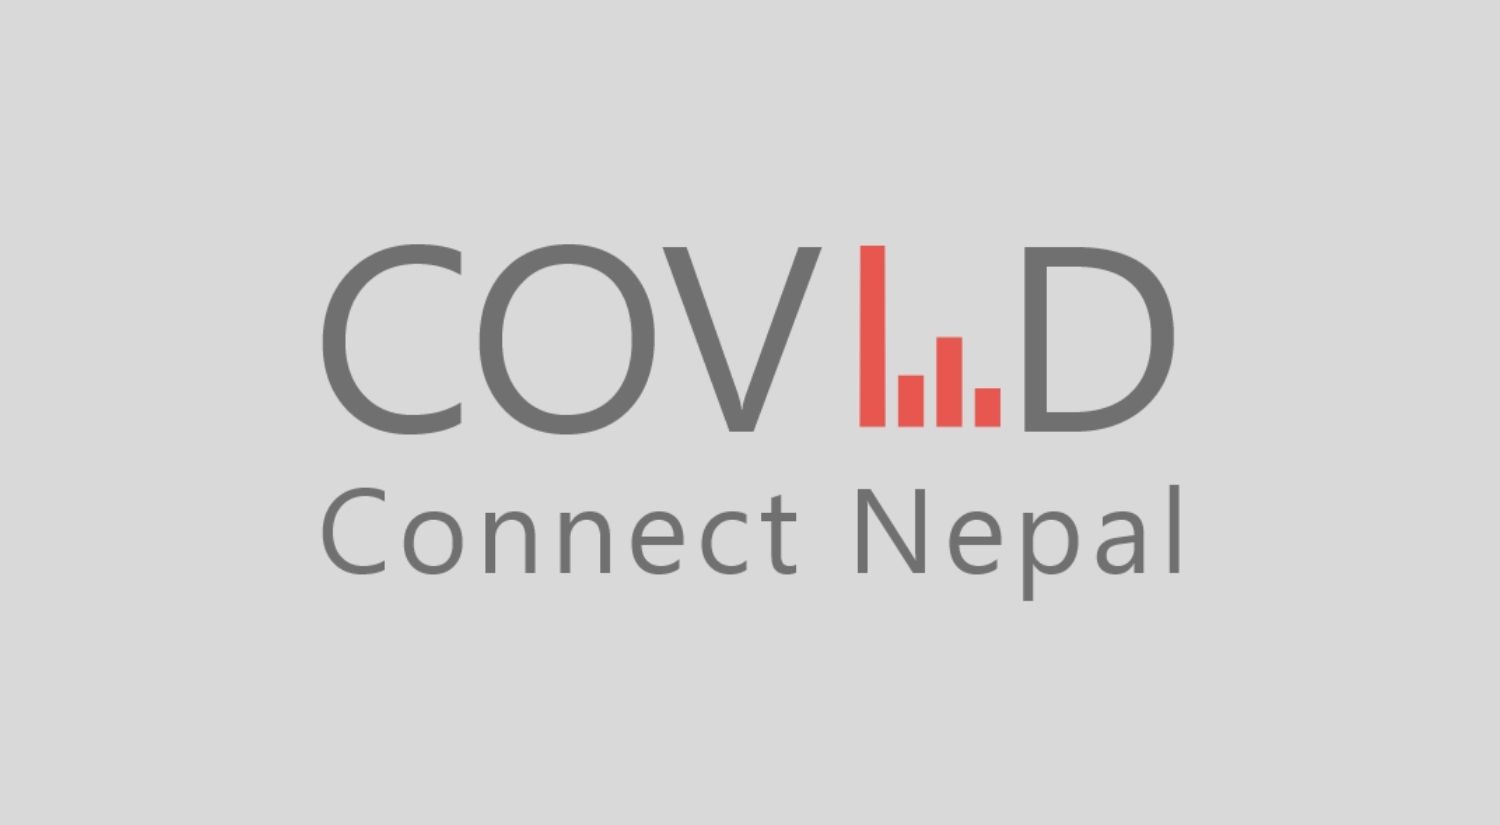 COVIC connect Nepal